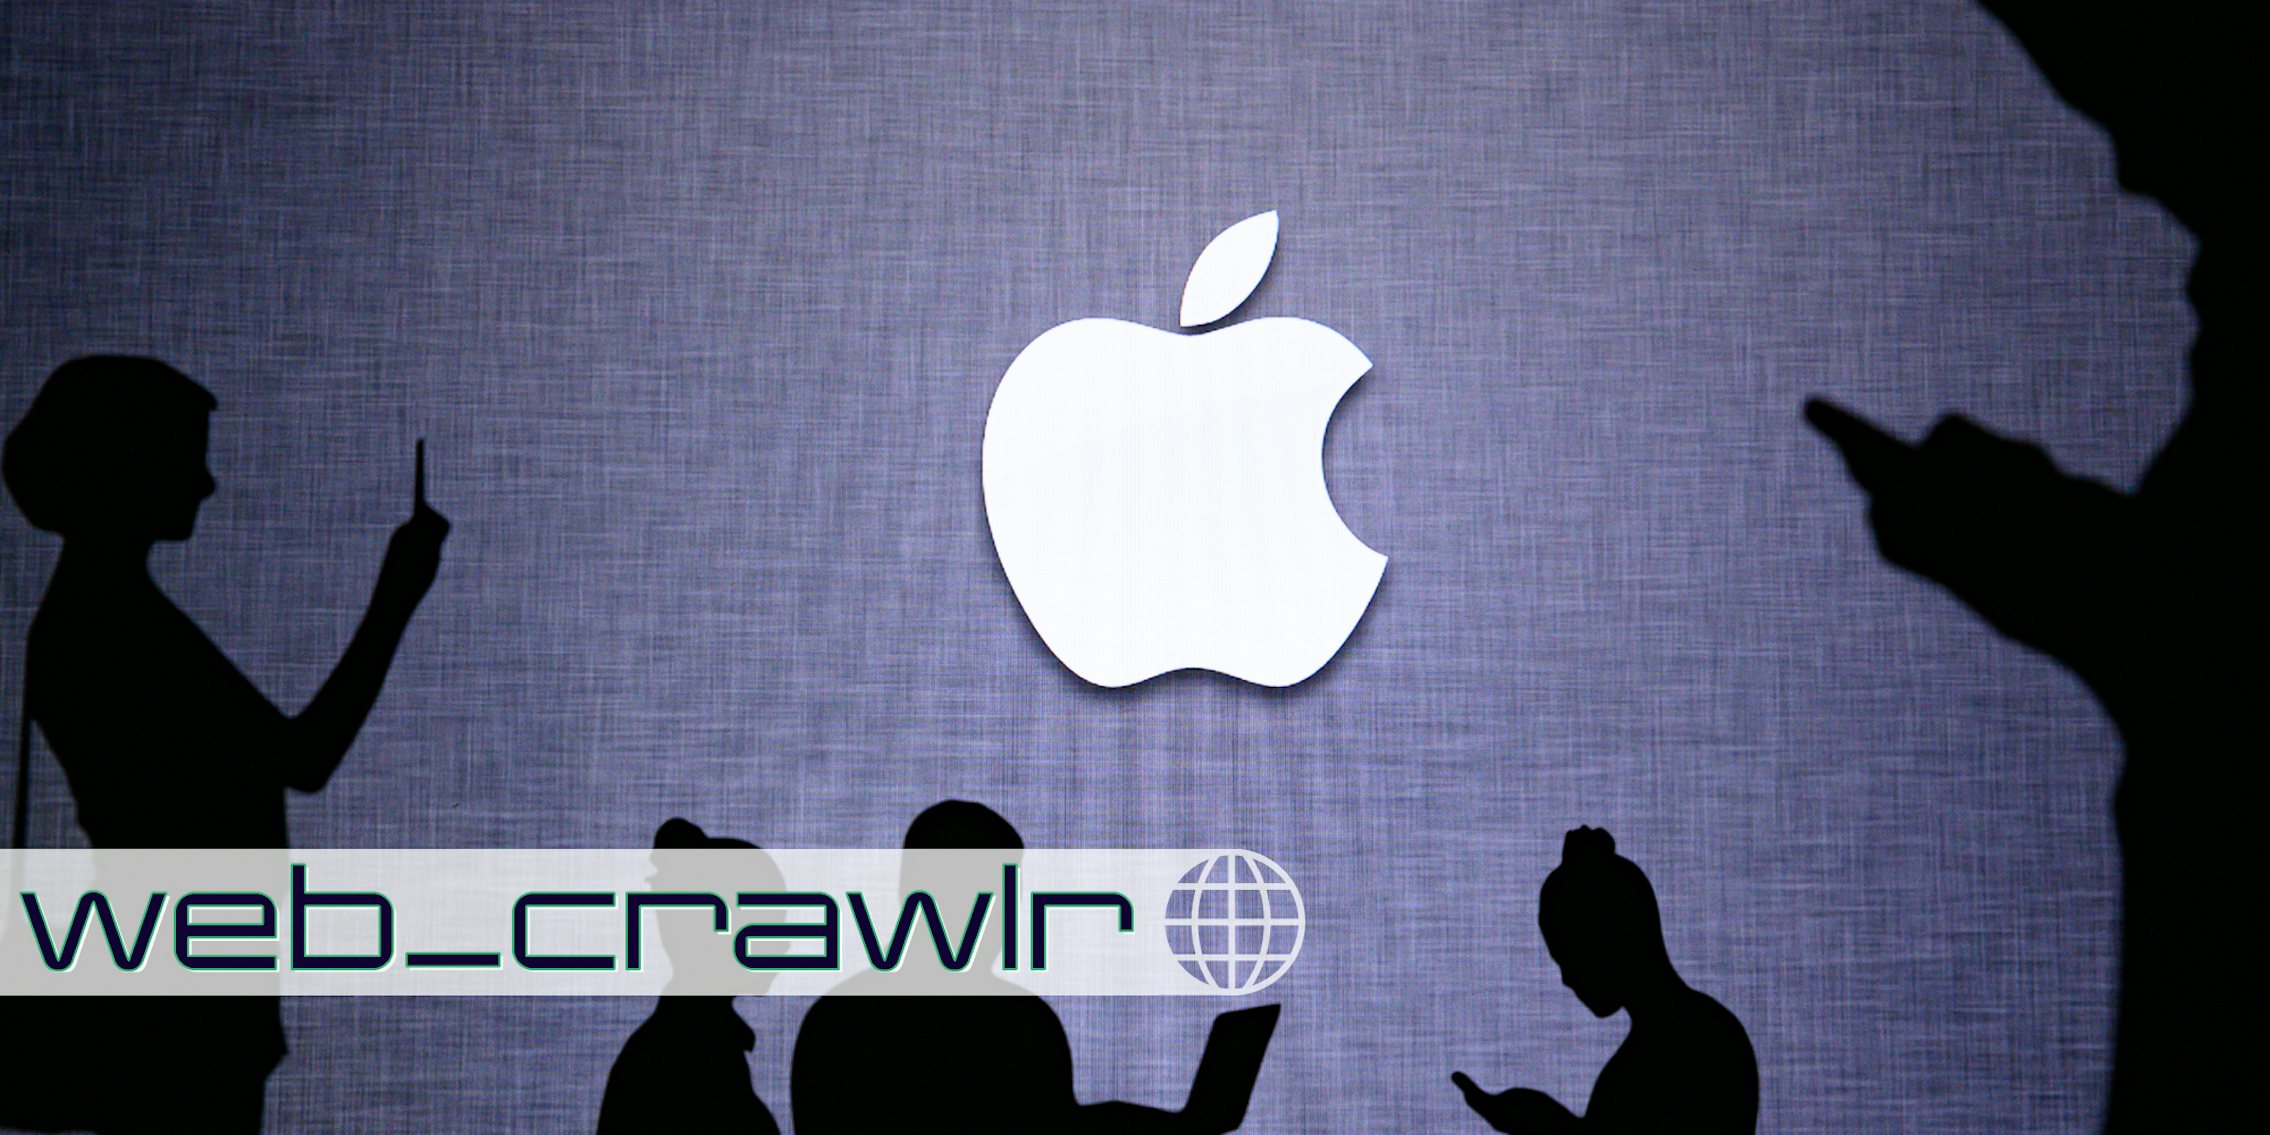 People in shadows holding phones and laptops with the Apple logo in the background. The Daily Dot newsletter web_crawlr logo is in the bottom left corner.